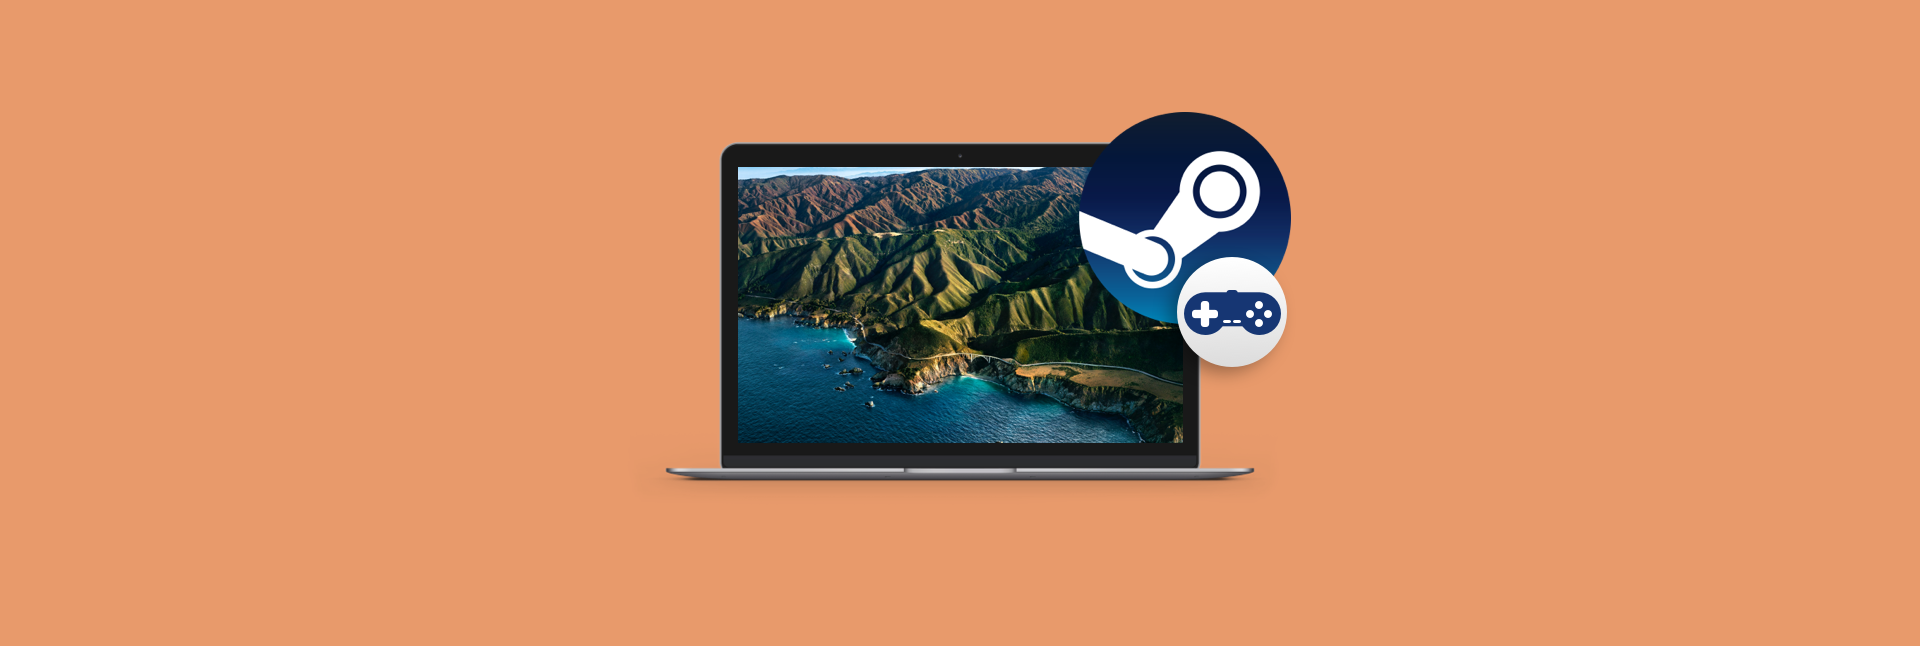 free games on steam for mac